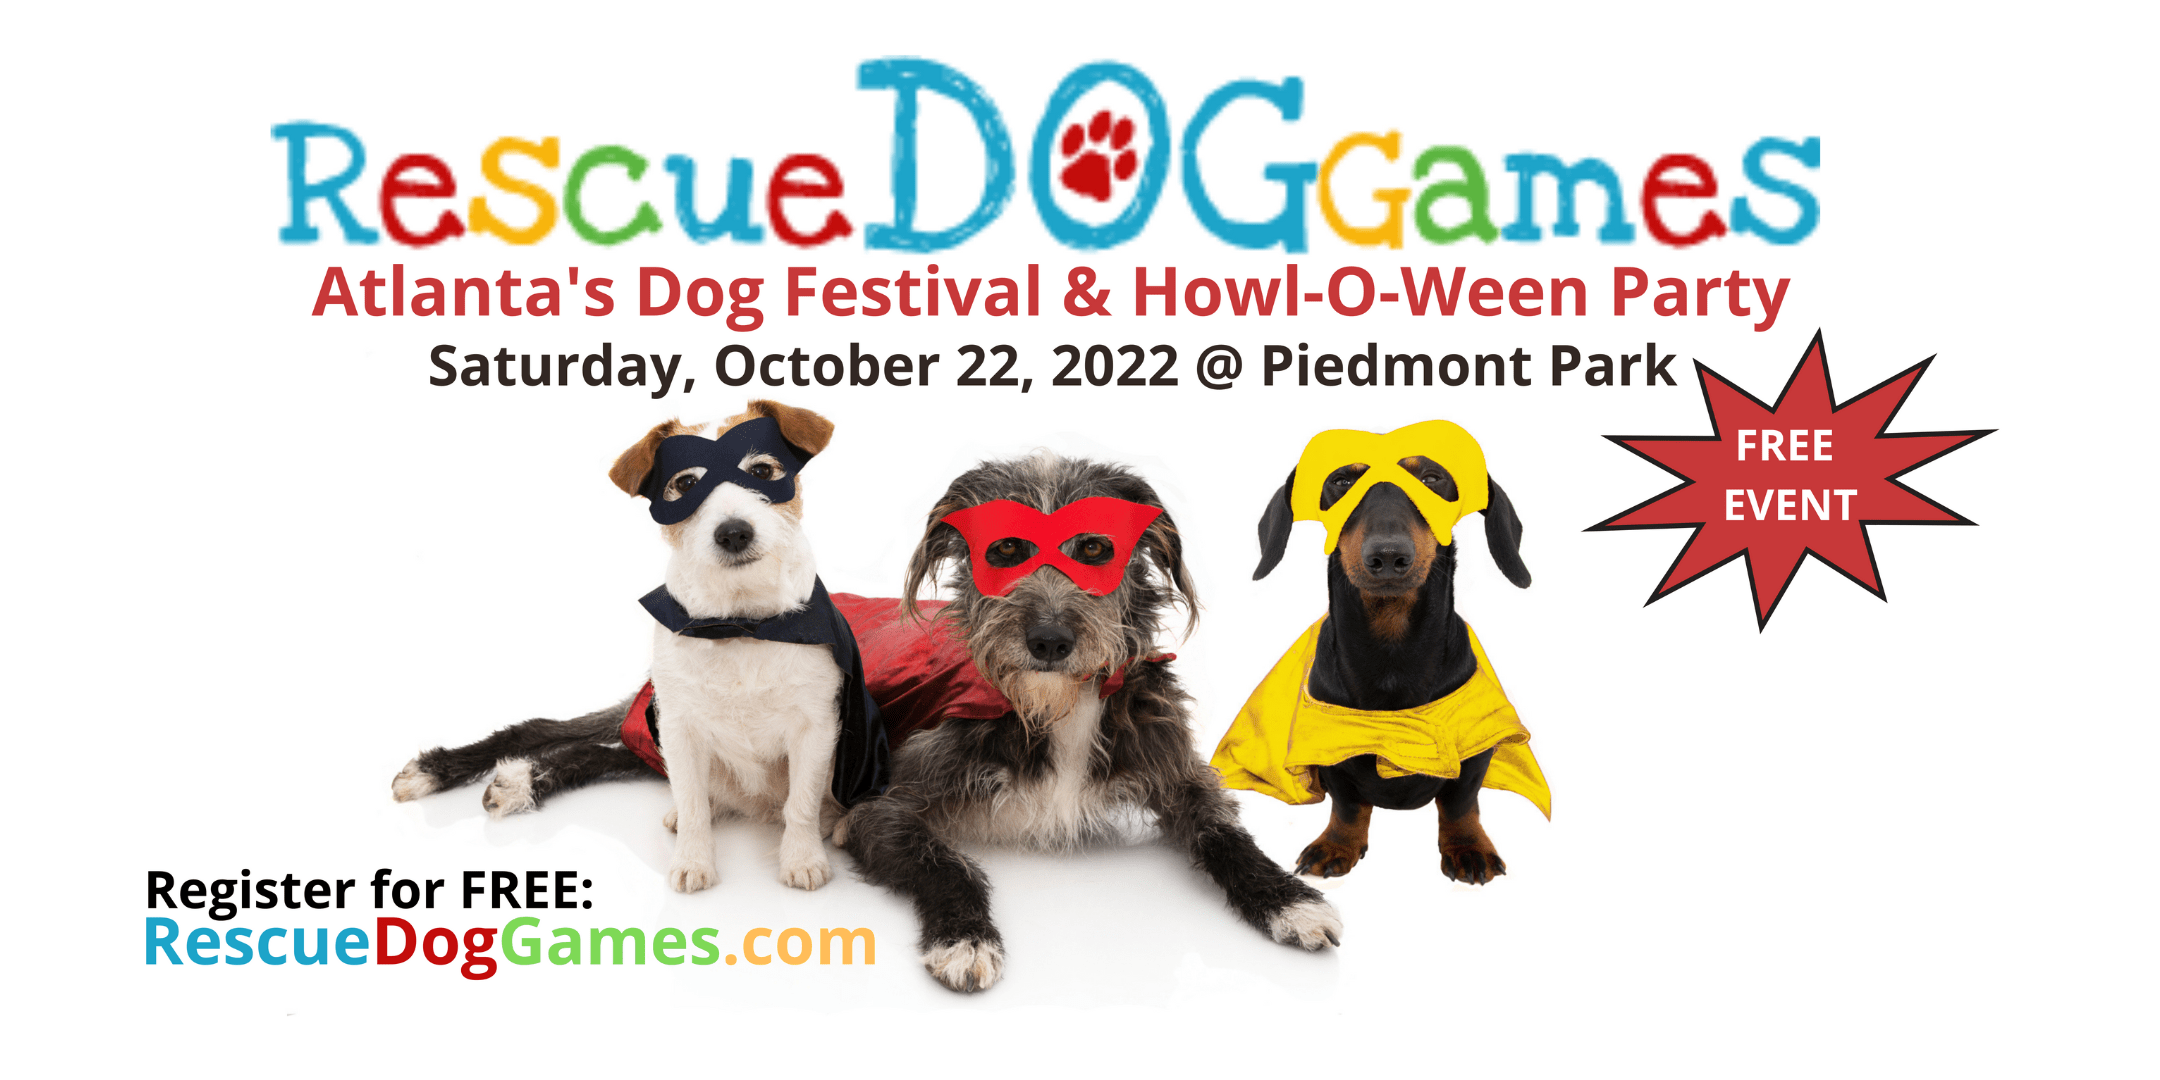 Register for the Rescue Dog Games